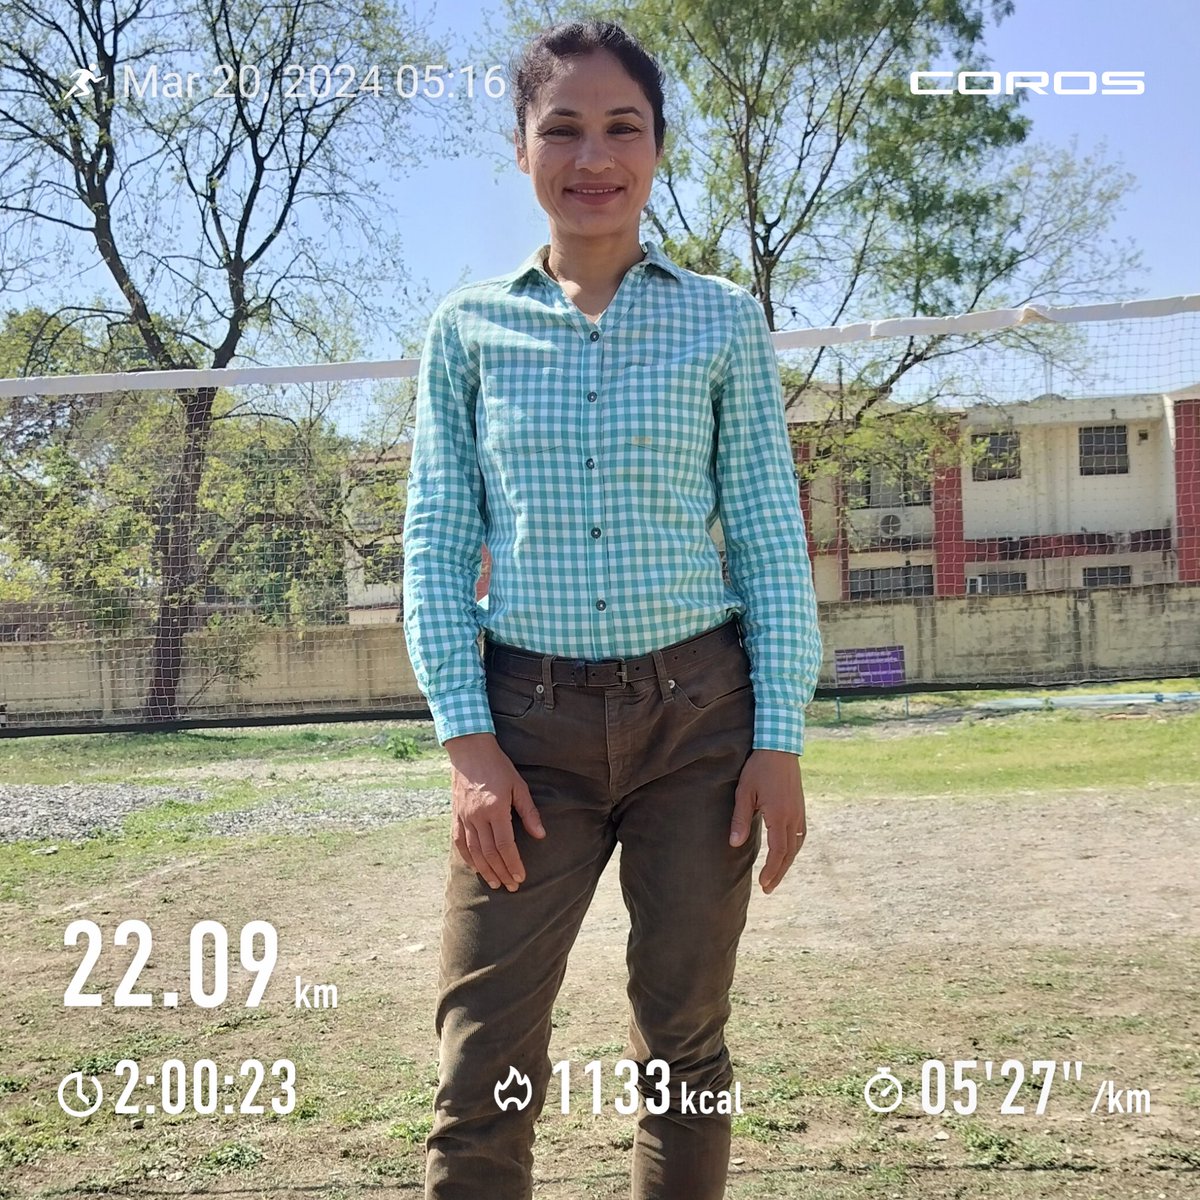 I do all my training in the early morning and as soon as I finish, I have to rush home to make breakfast and get ready for work. No time to take photos before that. Did long intervals today, 2 km Warm Up 3 km fast & 1.5km slow, till 18 km 2 km cool down.